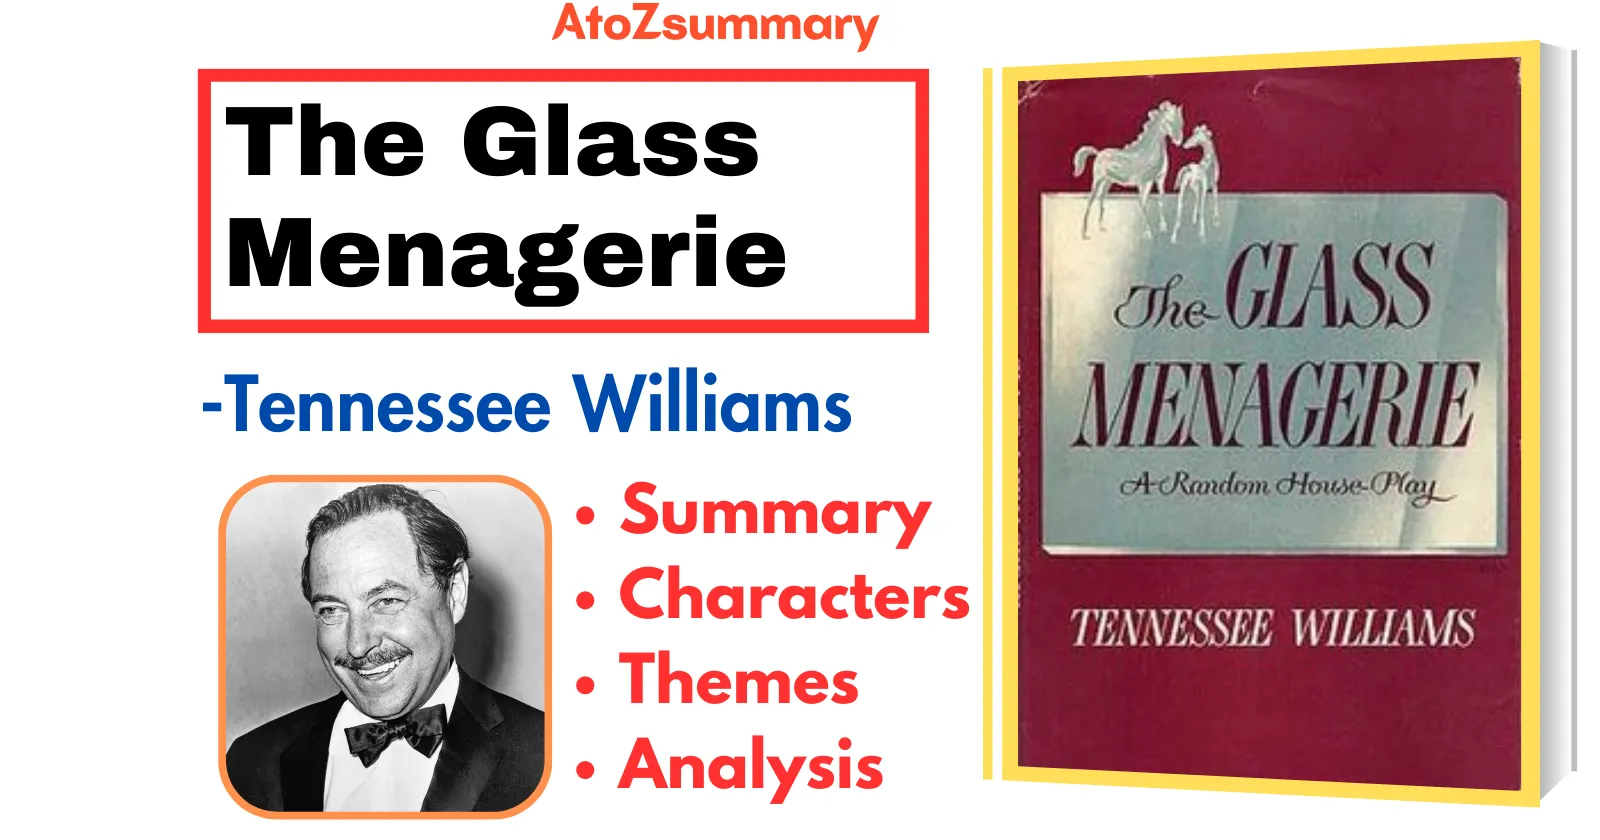 The Glass Menagerie Summary